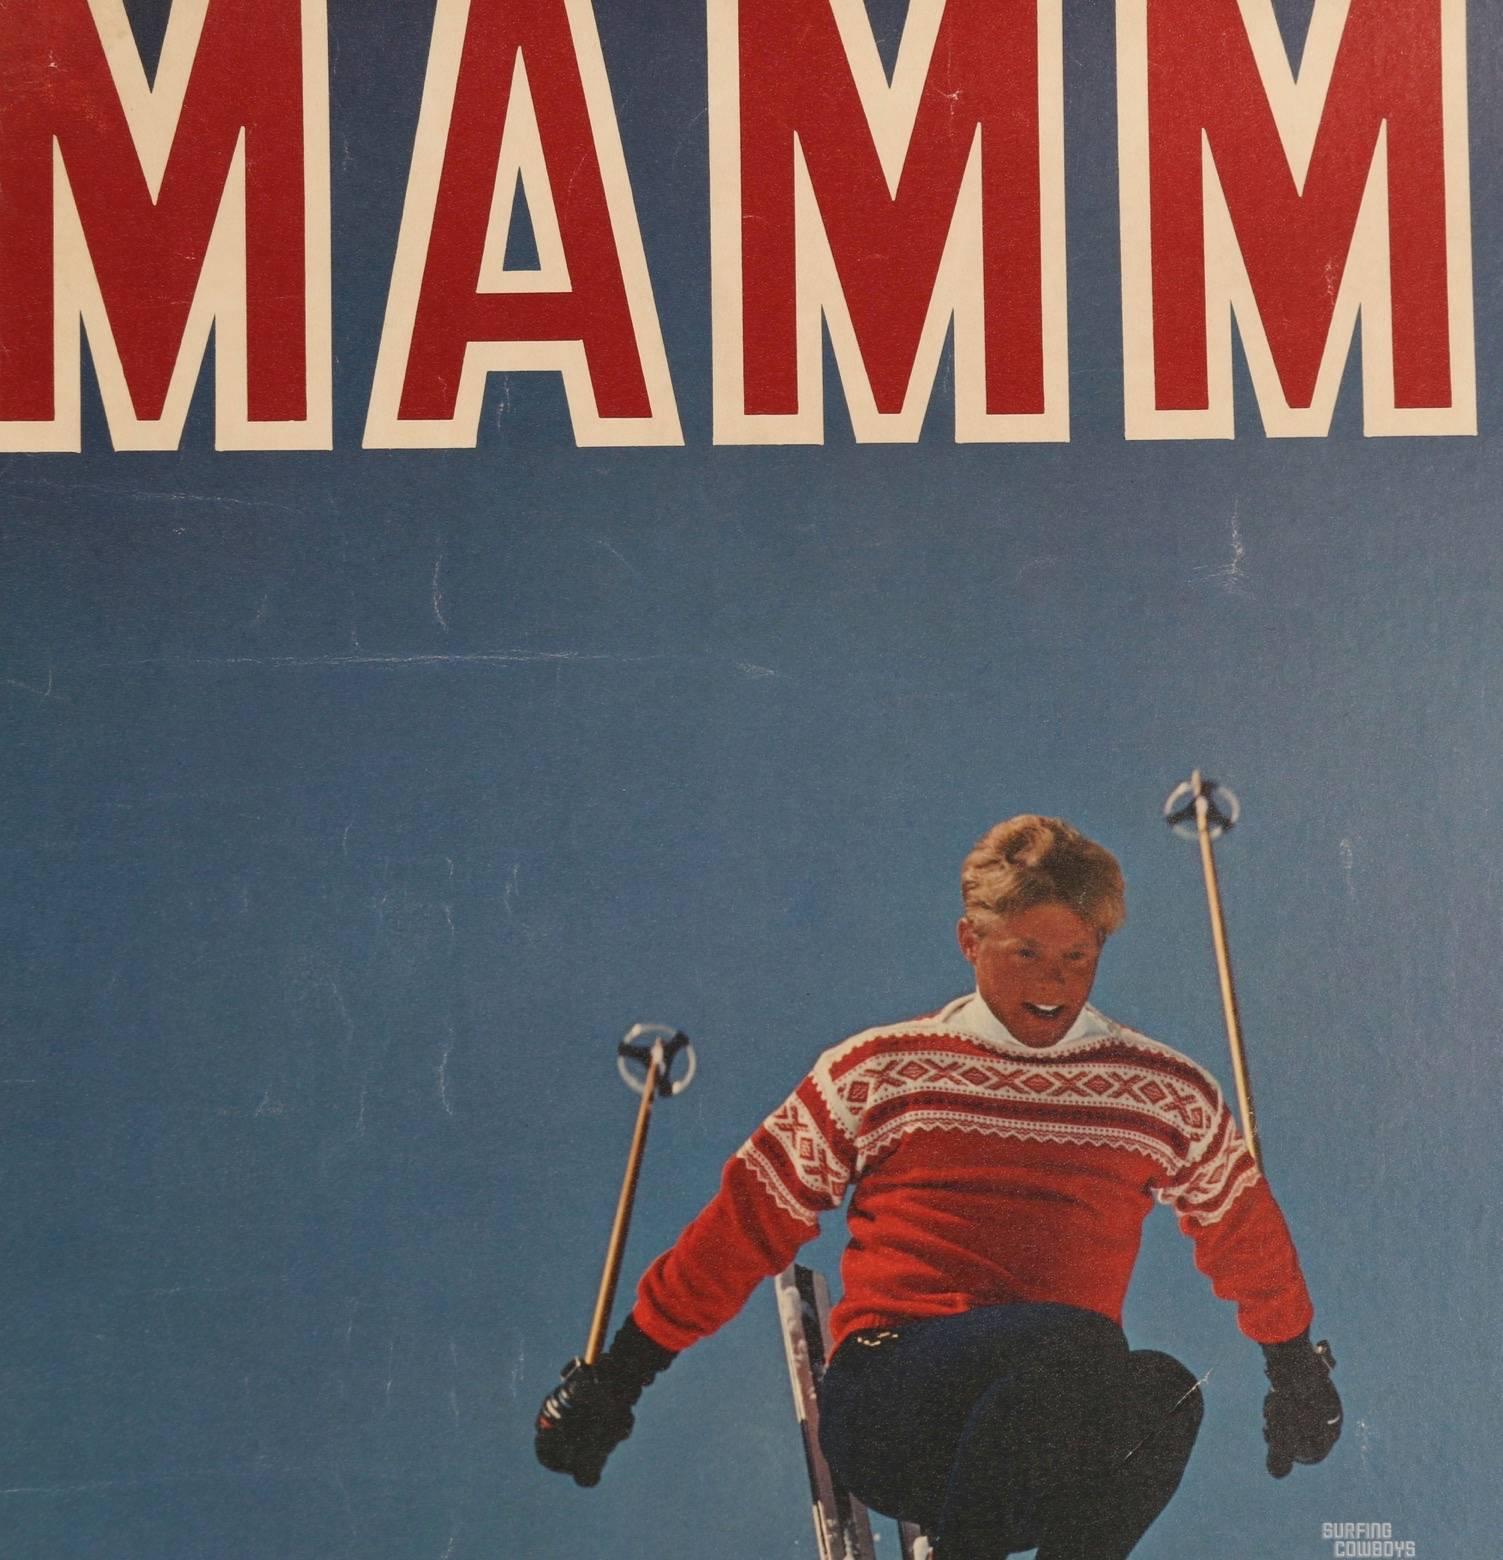 This all original Mammoth California ski poster, mounted on linen, is from the high speed photograph of a skier catching air in the snowy powder of the great Mammoth Mountain. Resplendent in his red and white woolen ski sweater and his healthy tan,